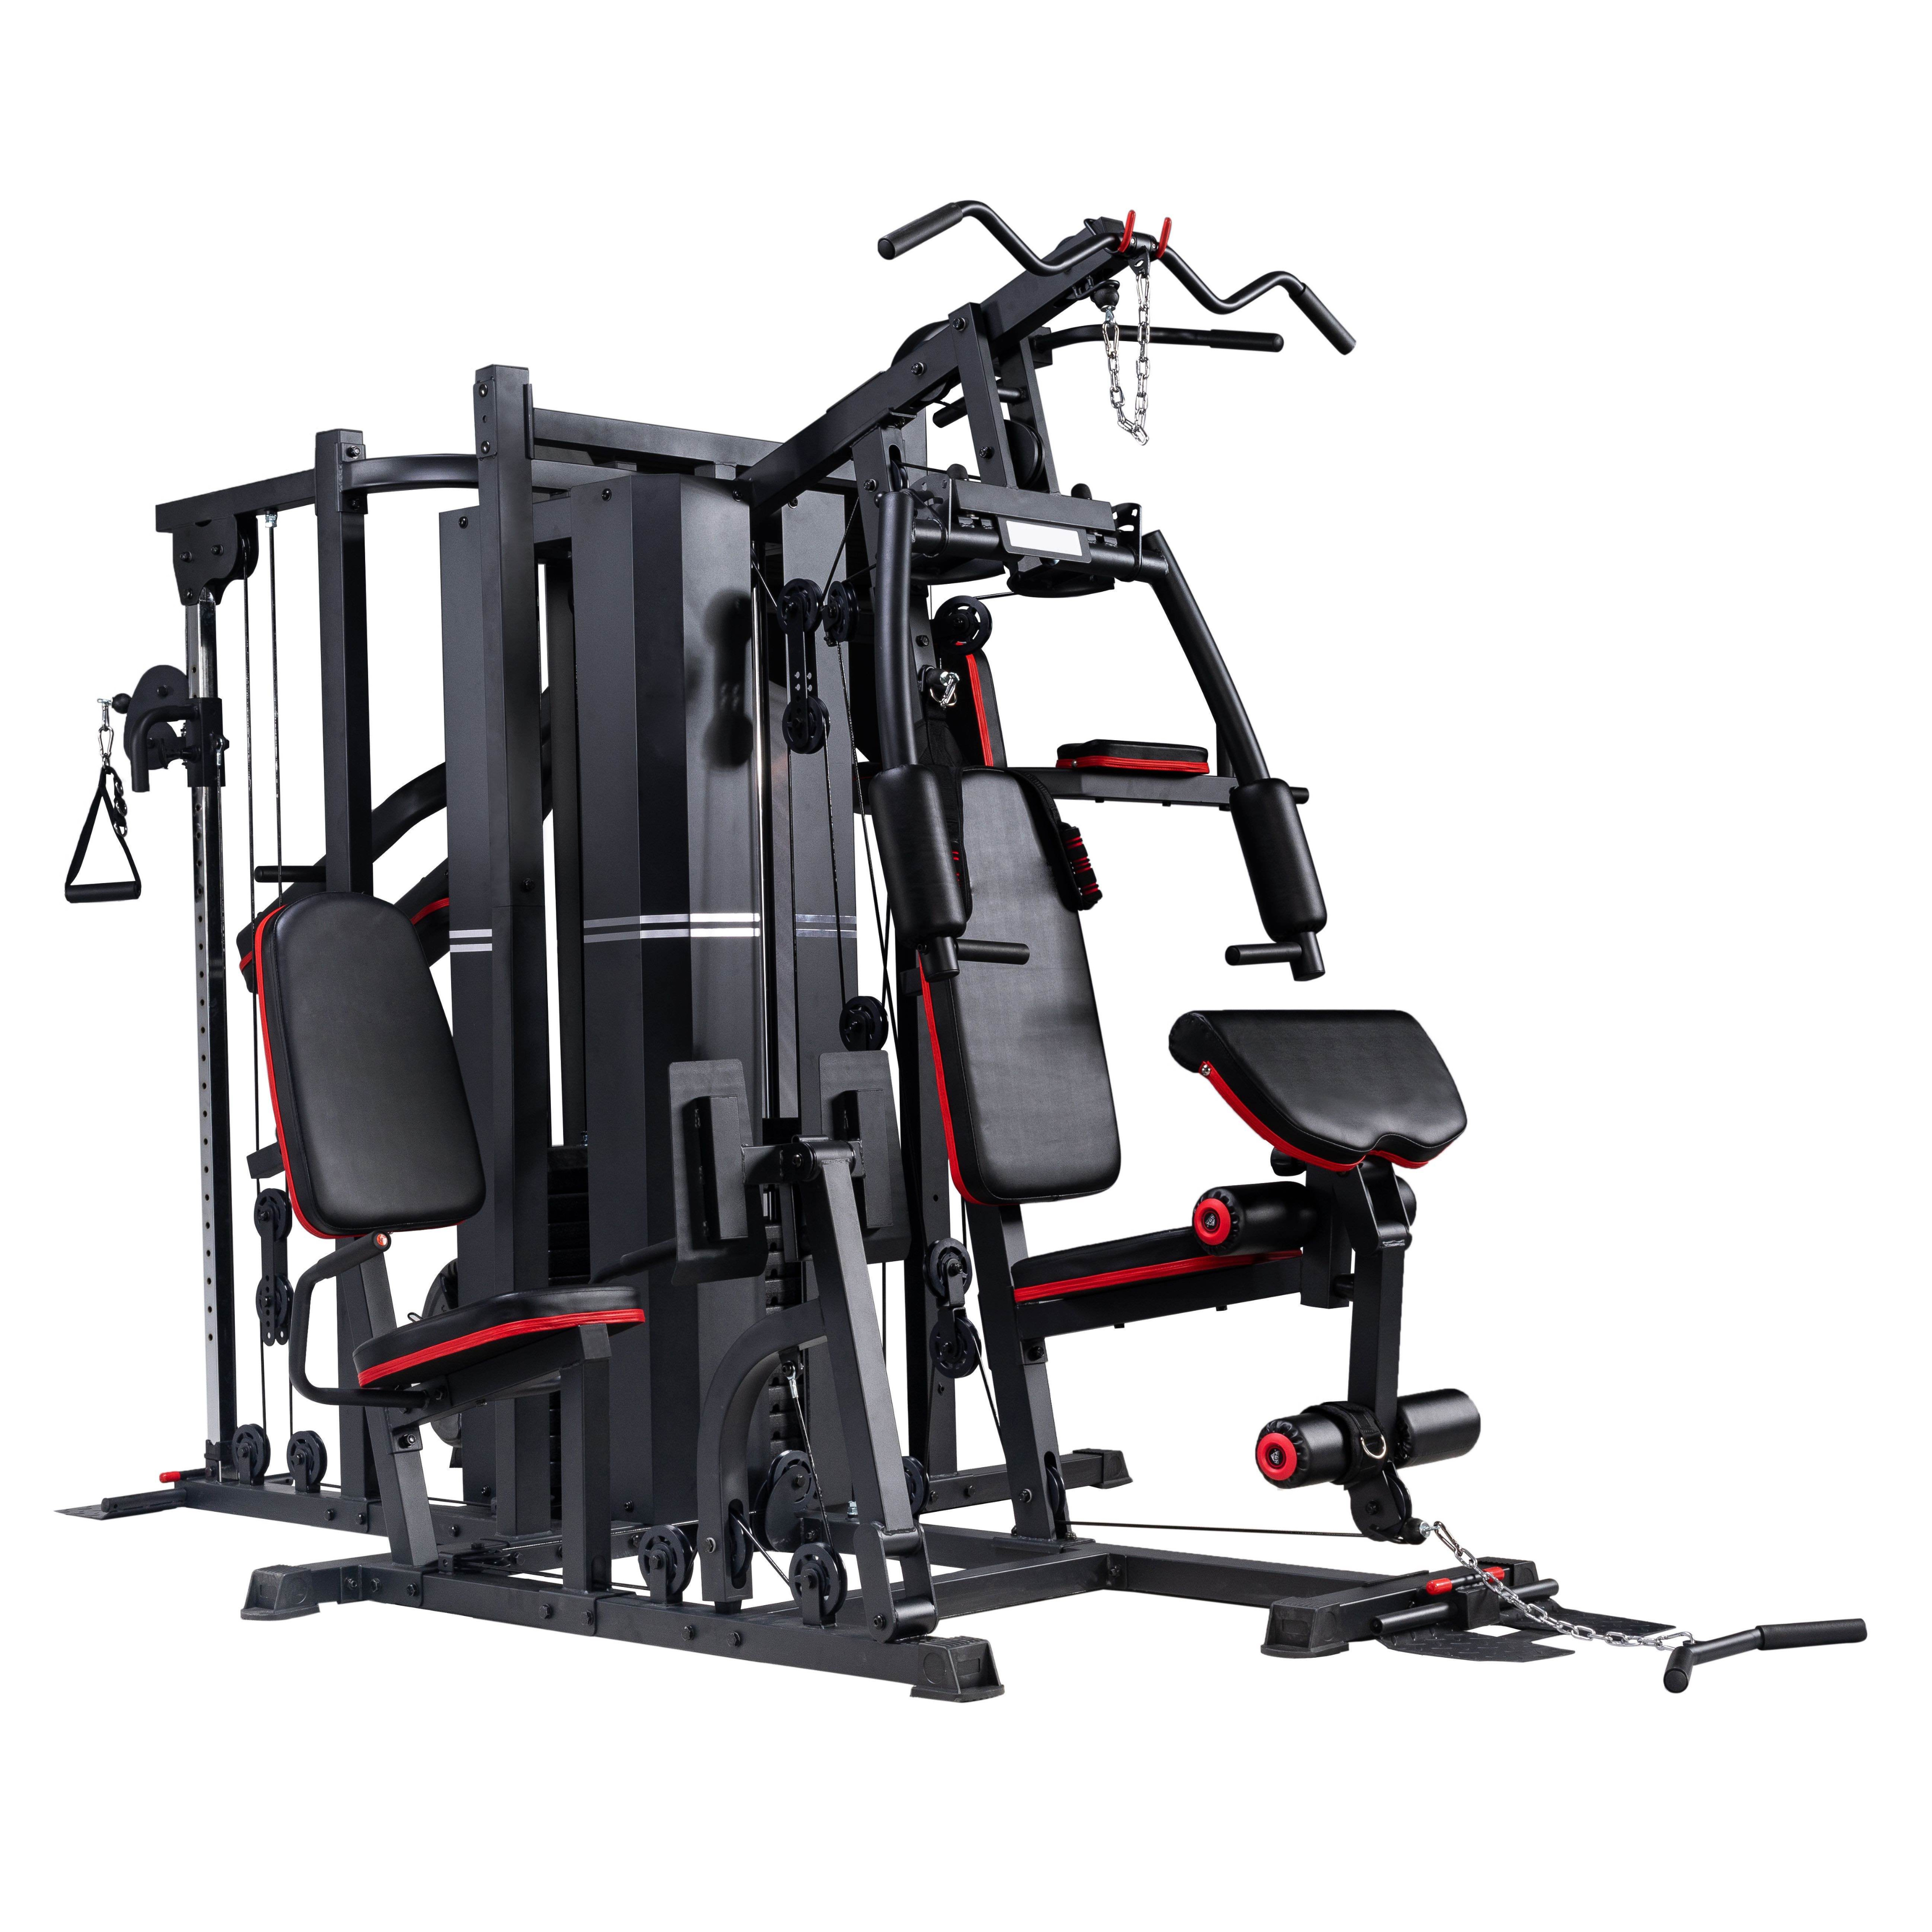 Cross X 500 Plus Multi-Station Home Gym (Pre-Order Early March